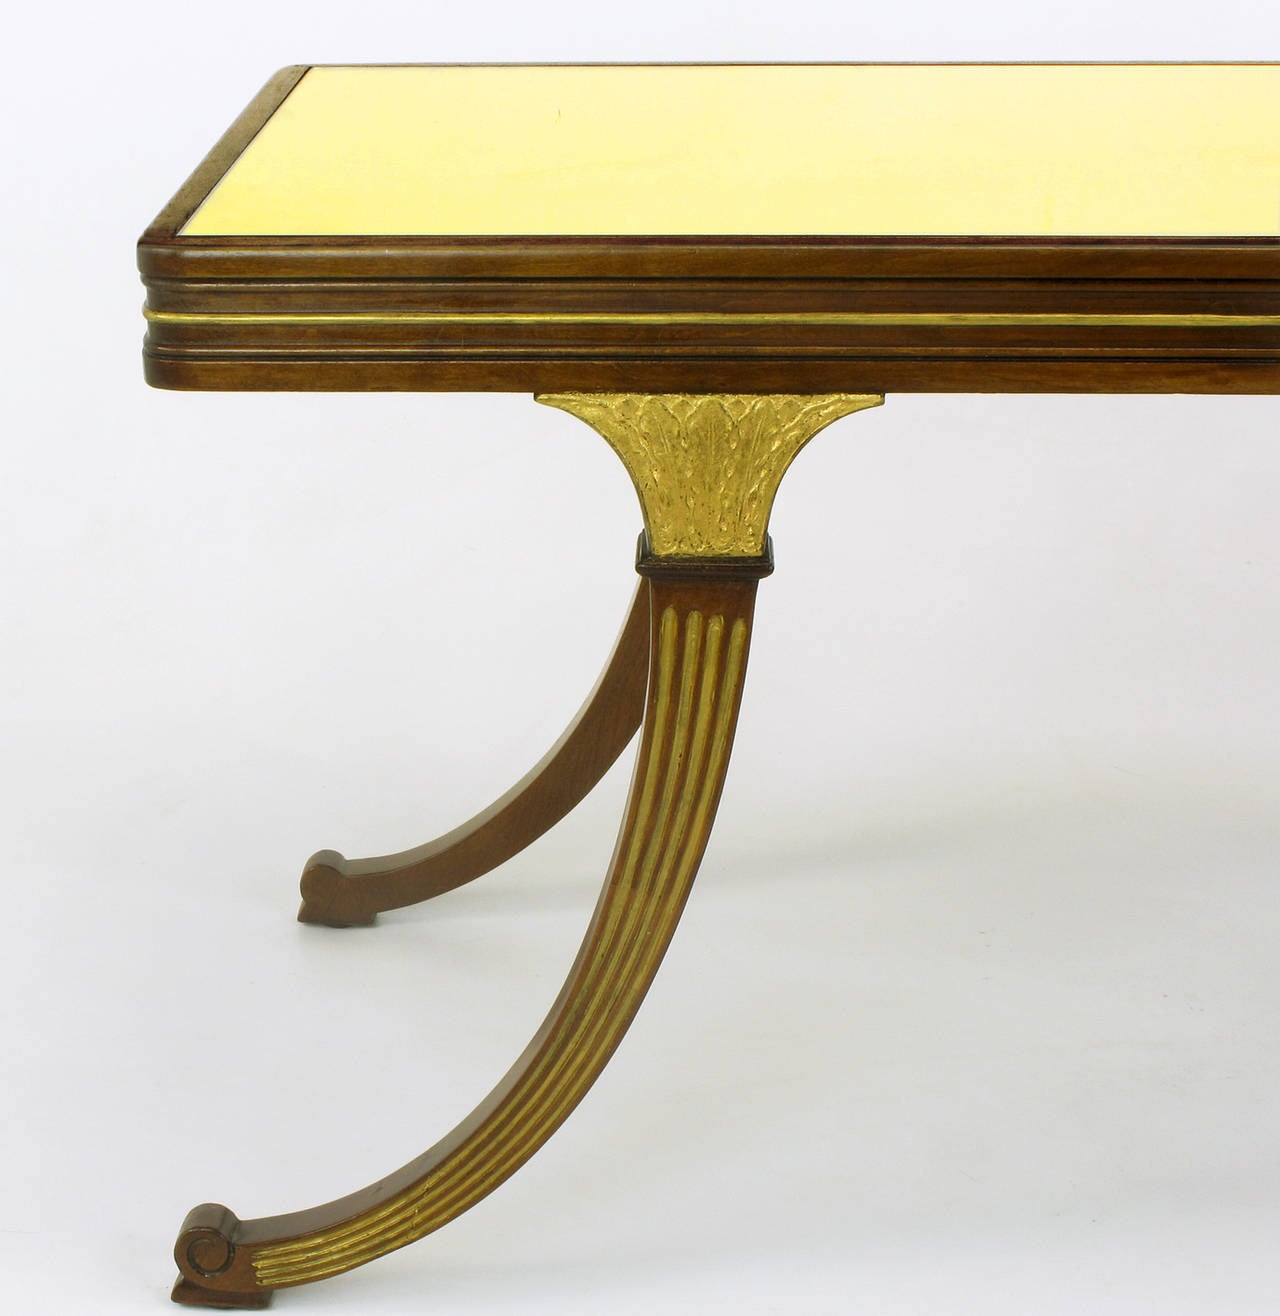 20th Century Early 1900s Parcel-Gilt and Walnut Empire Coffee Table with Gold Mirror Top For Sale